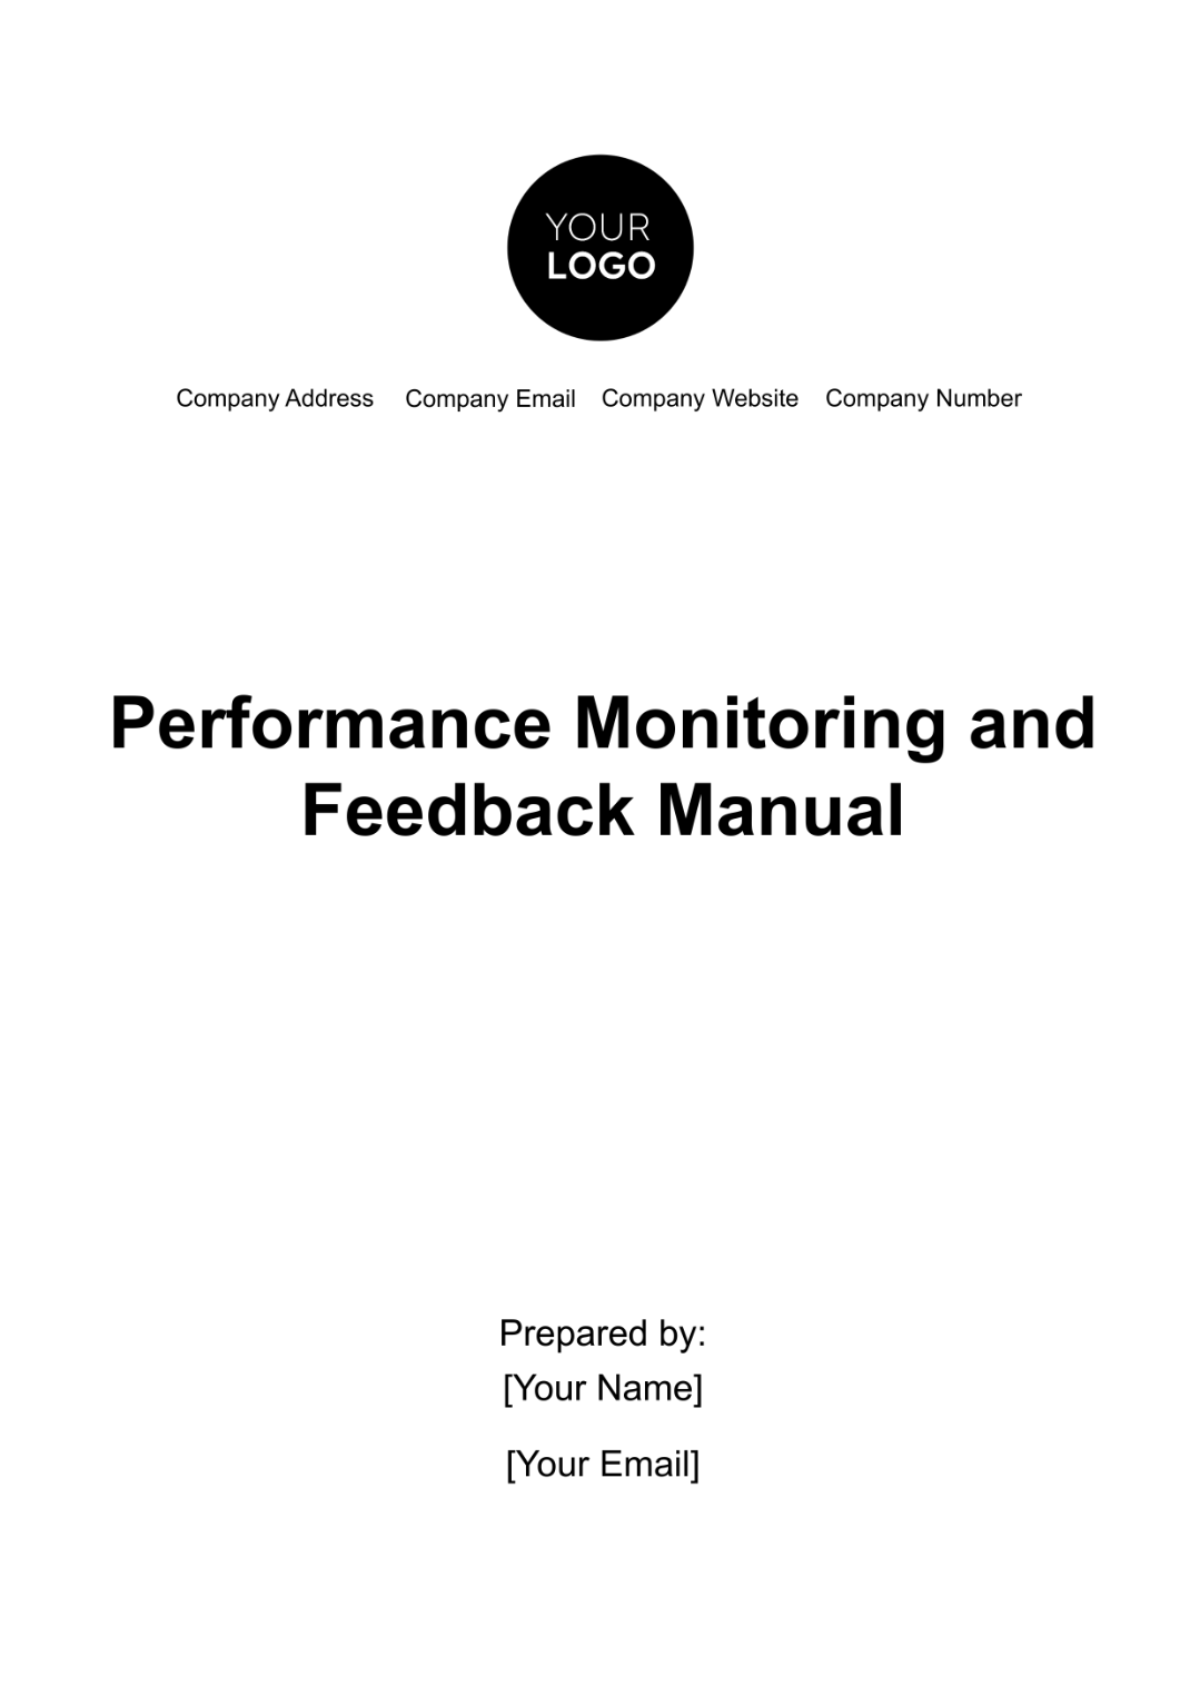 Performance Monitoring and Feedback Manual HR Template